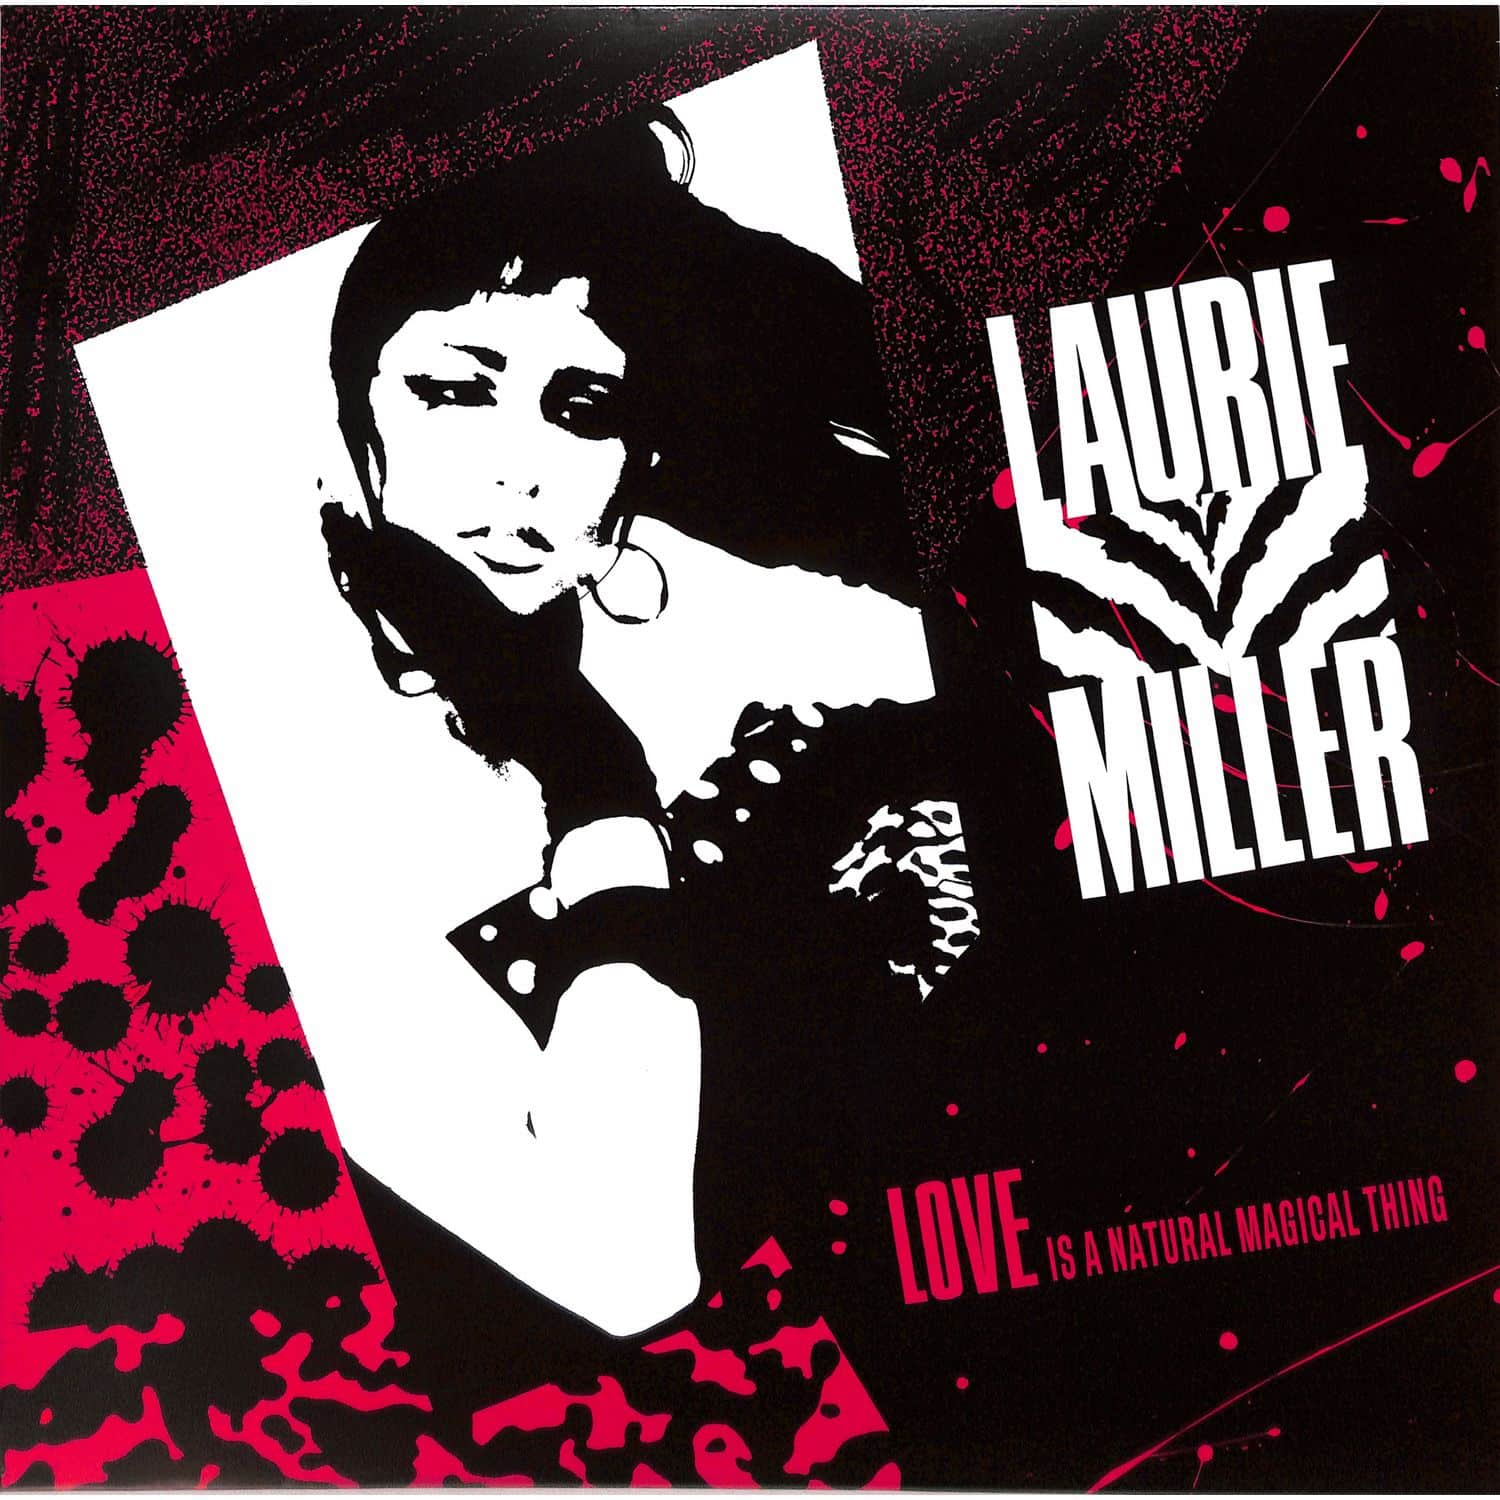 Laurie Miller - LOVE IS A NATURAL MAGICAL THING